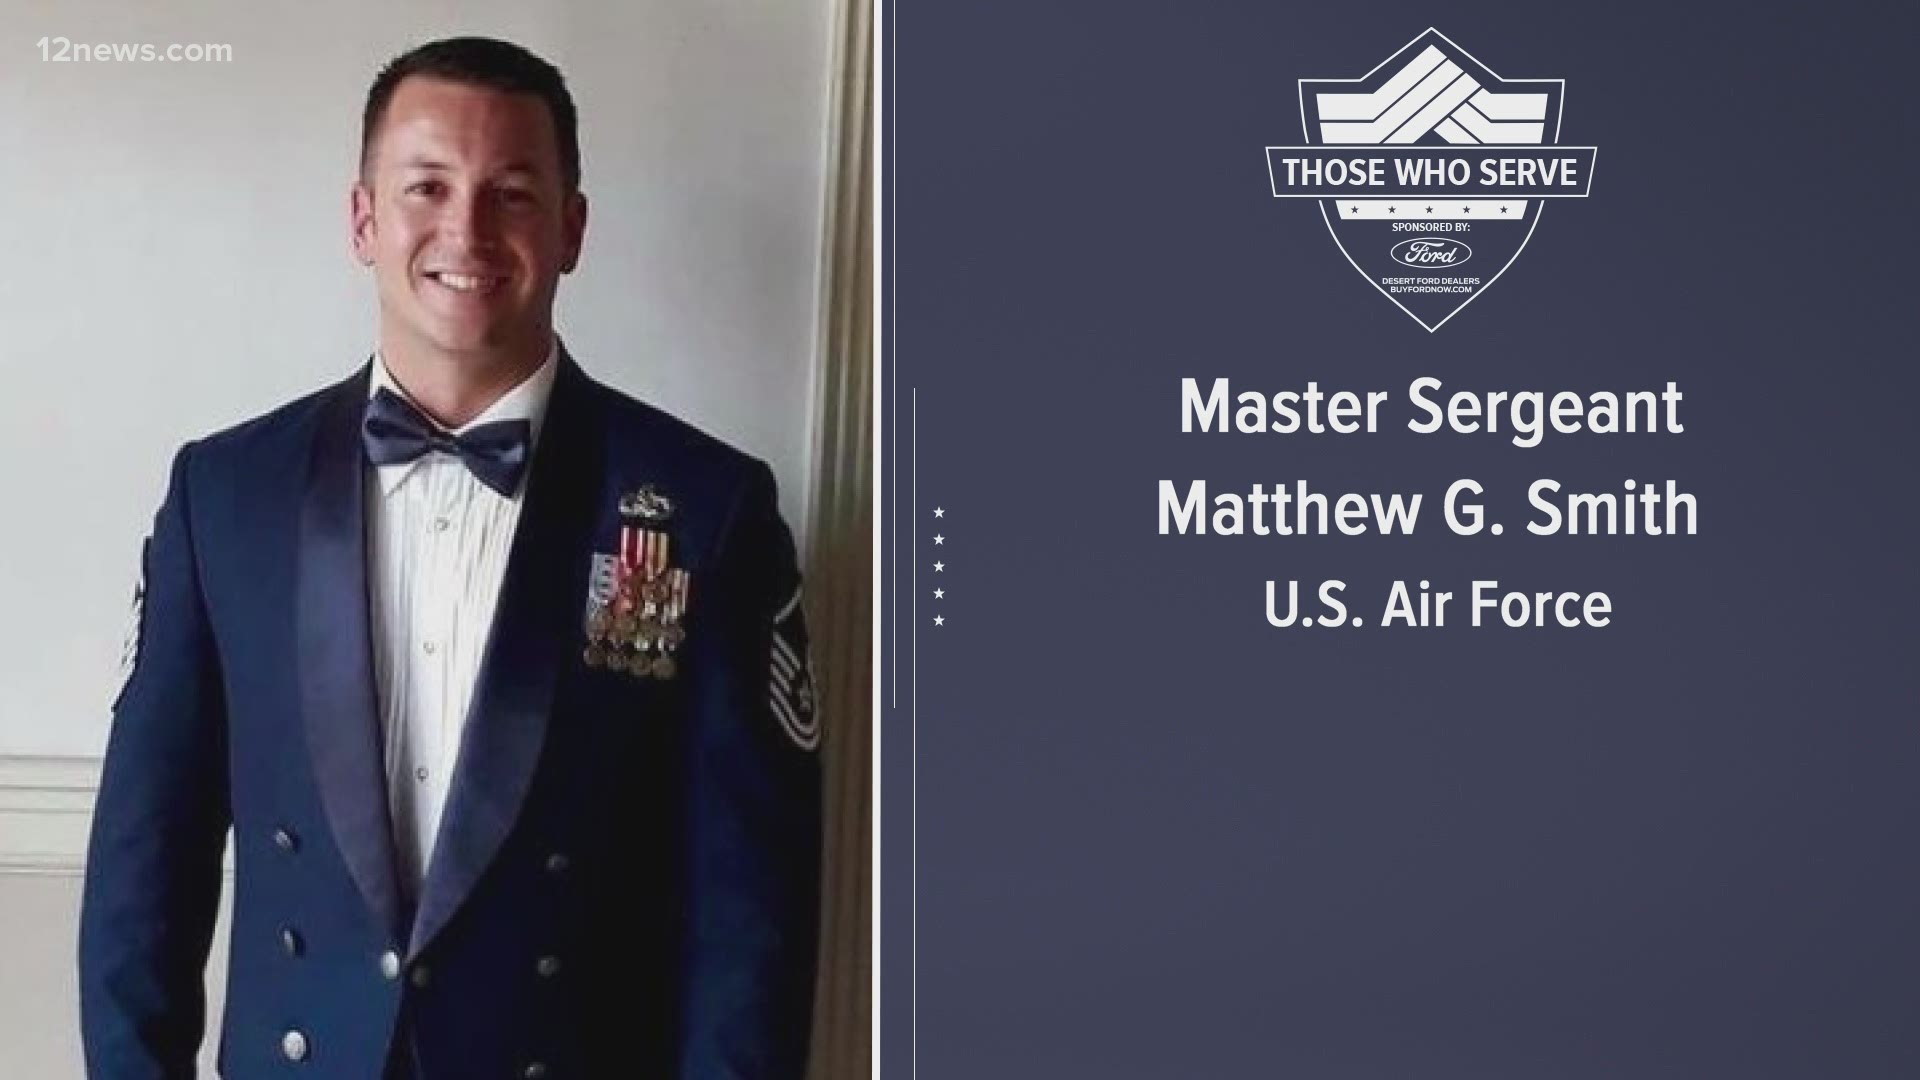 For this week's spotlight for "Those Who Serve," we recognize Master Sergeant Matthew G. Smith.